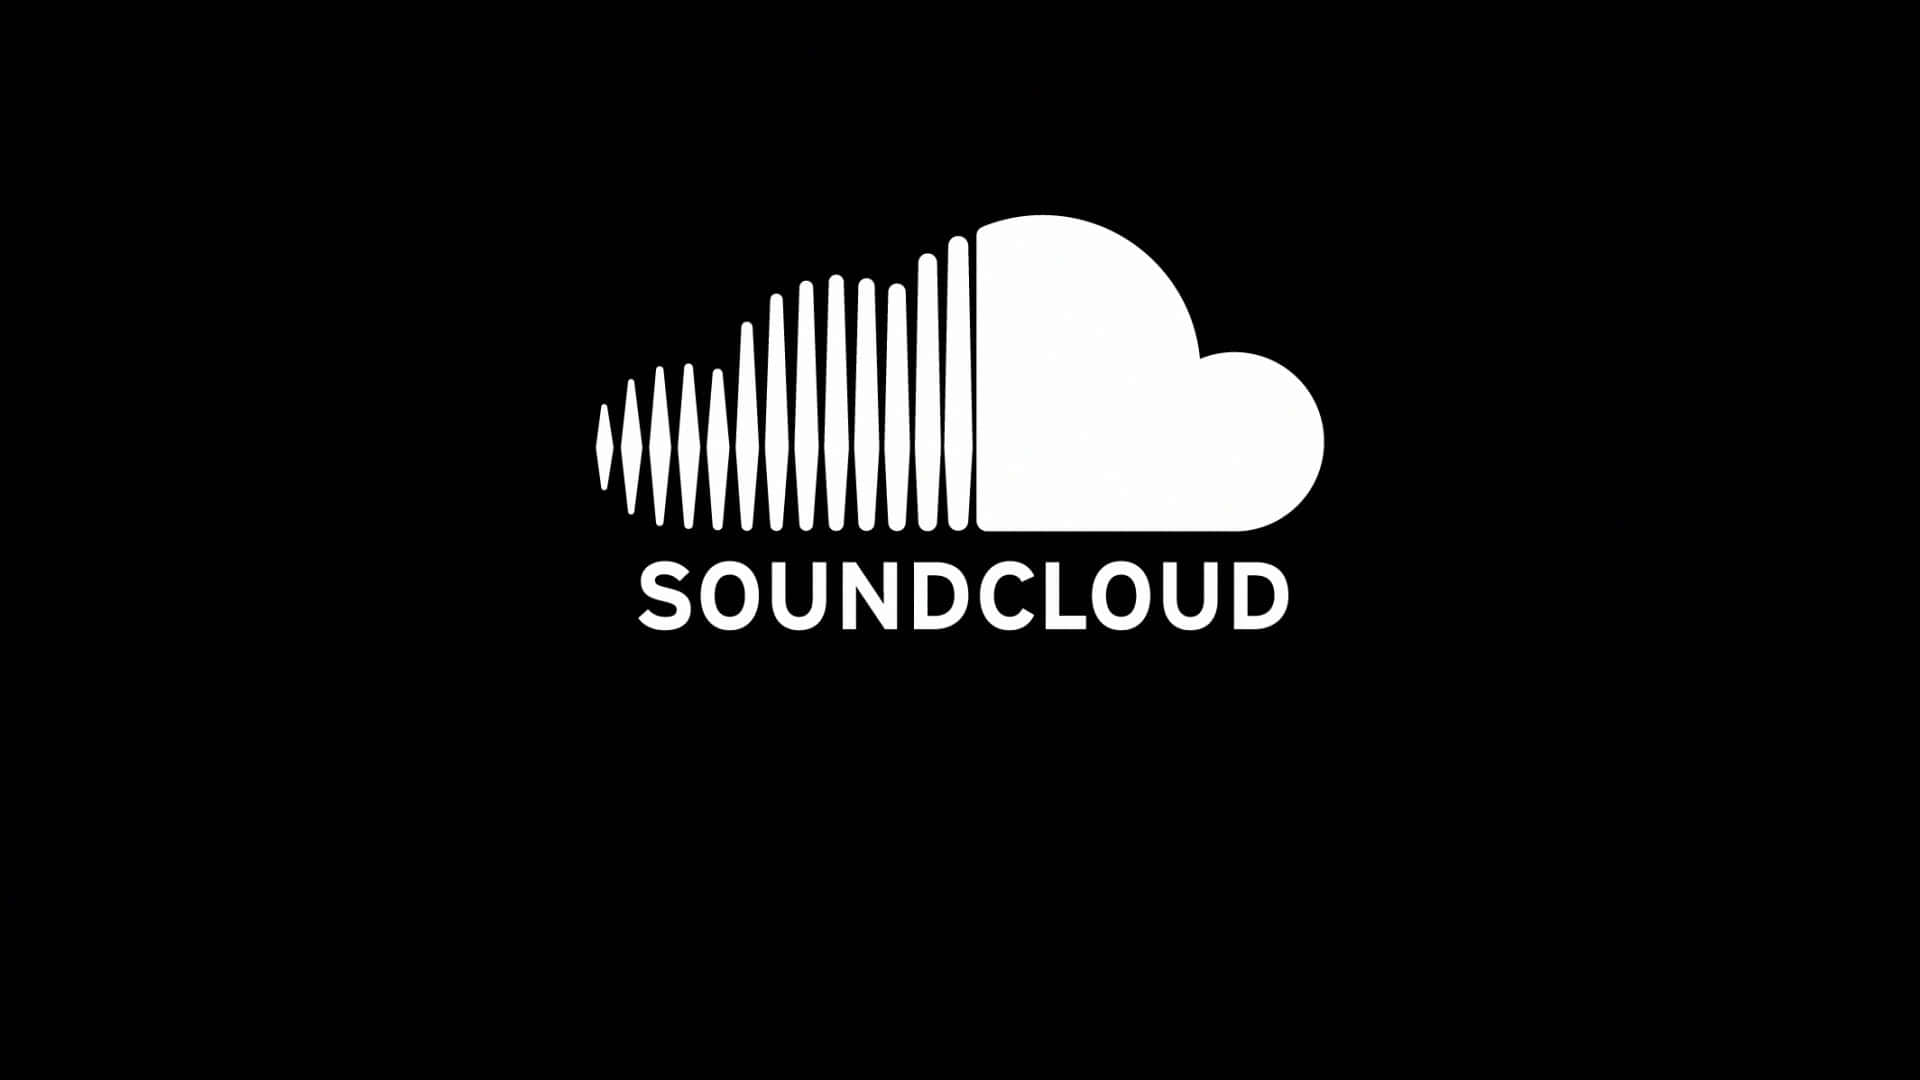 Discover music from around the world on SoundCloud